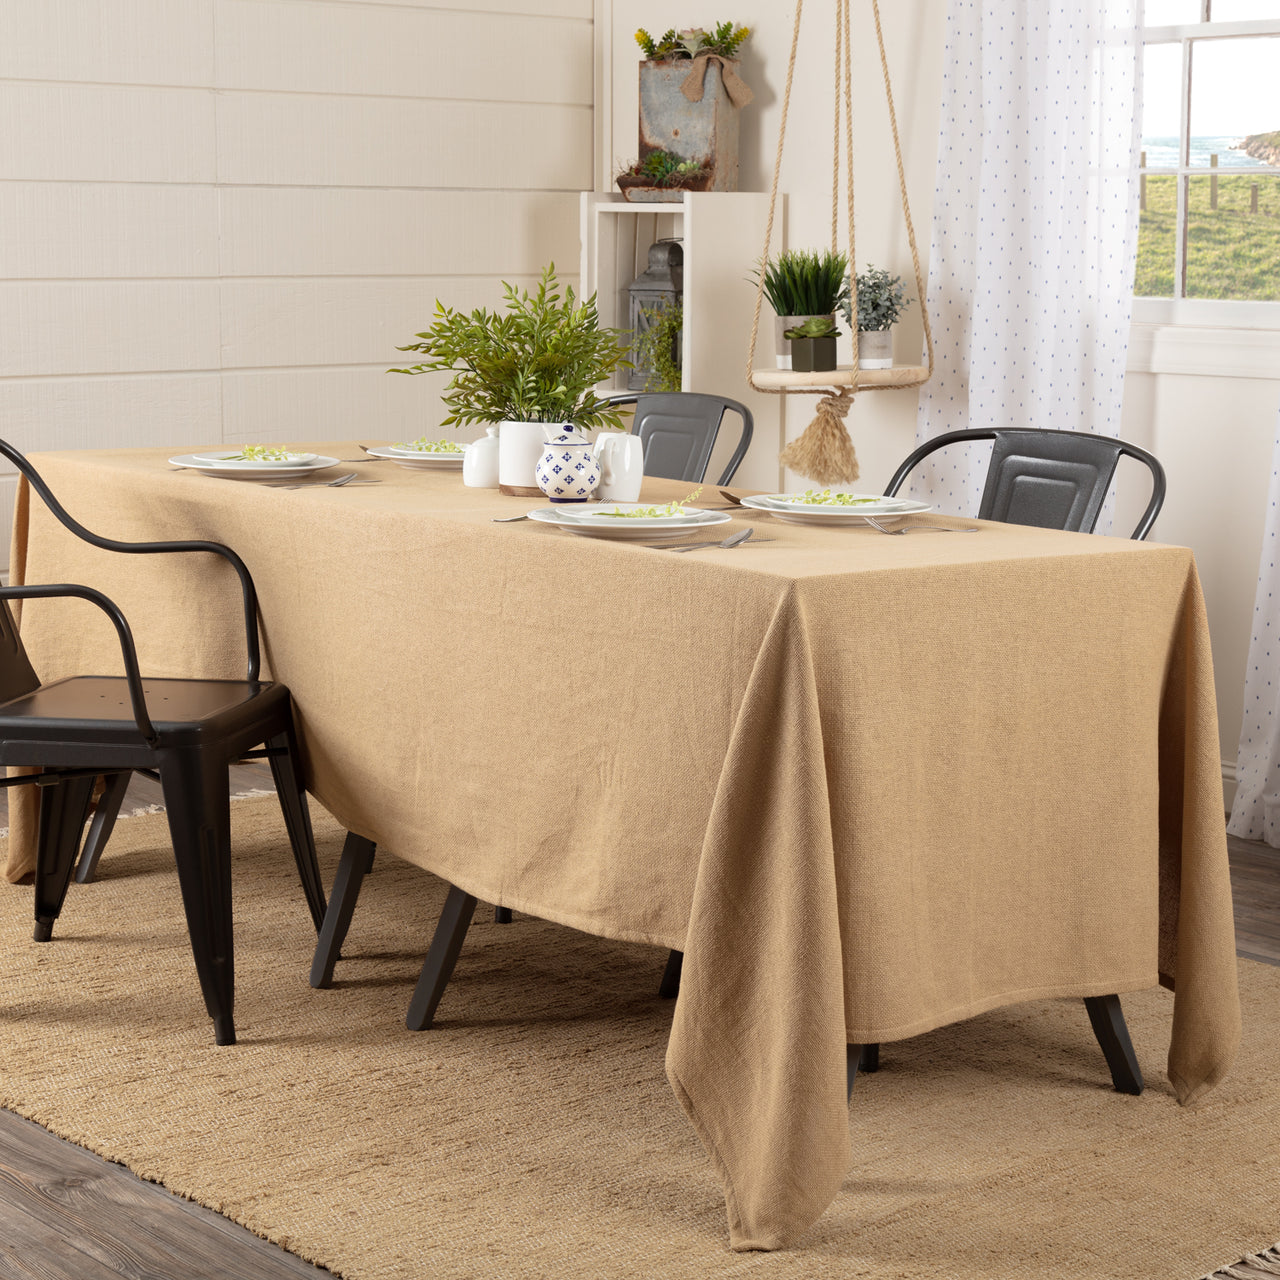 Burlap Natural Table Cloth 60x120 VHC Brands